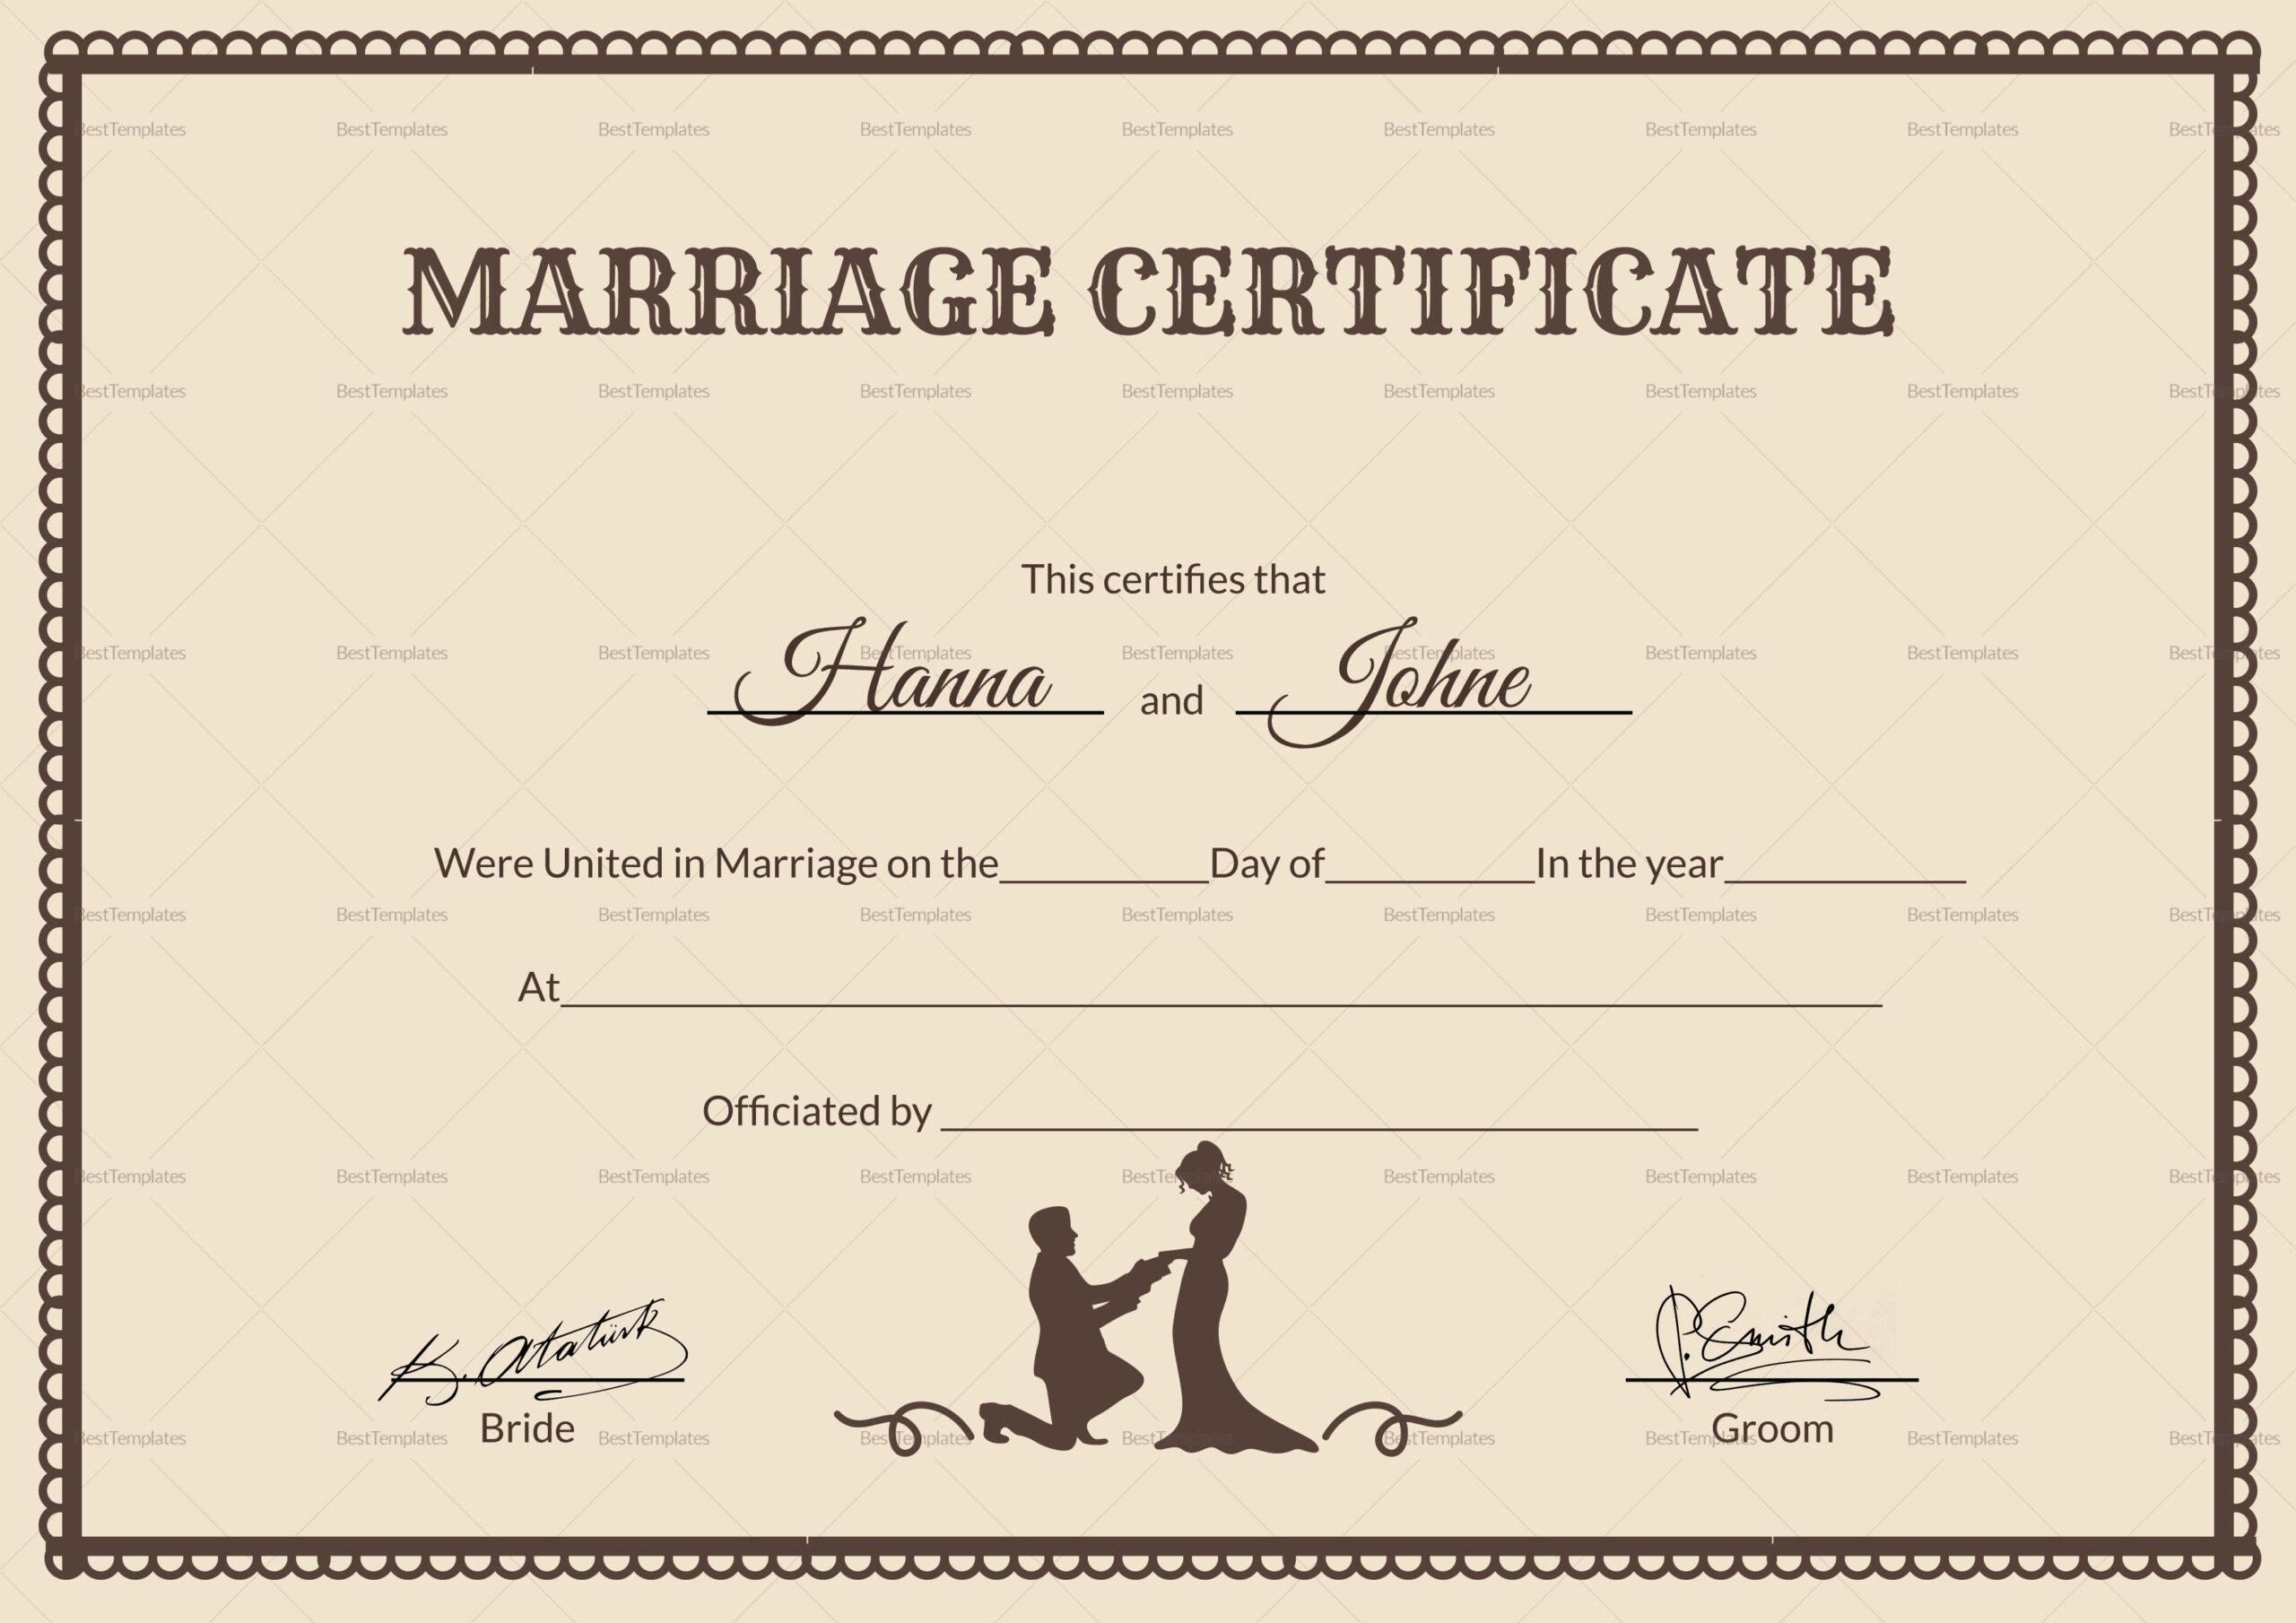 Free Editable Marriage Certificate Template | Sample | Format In PDF